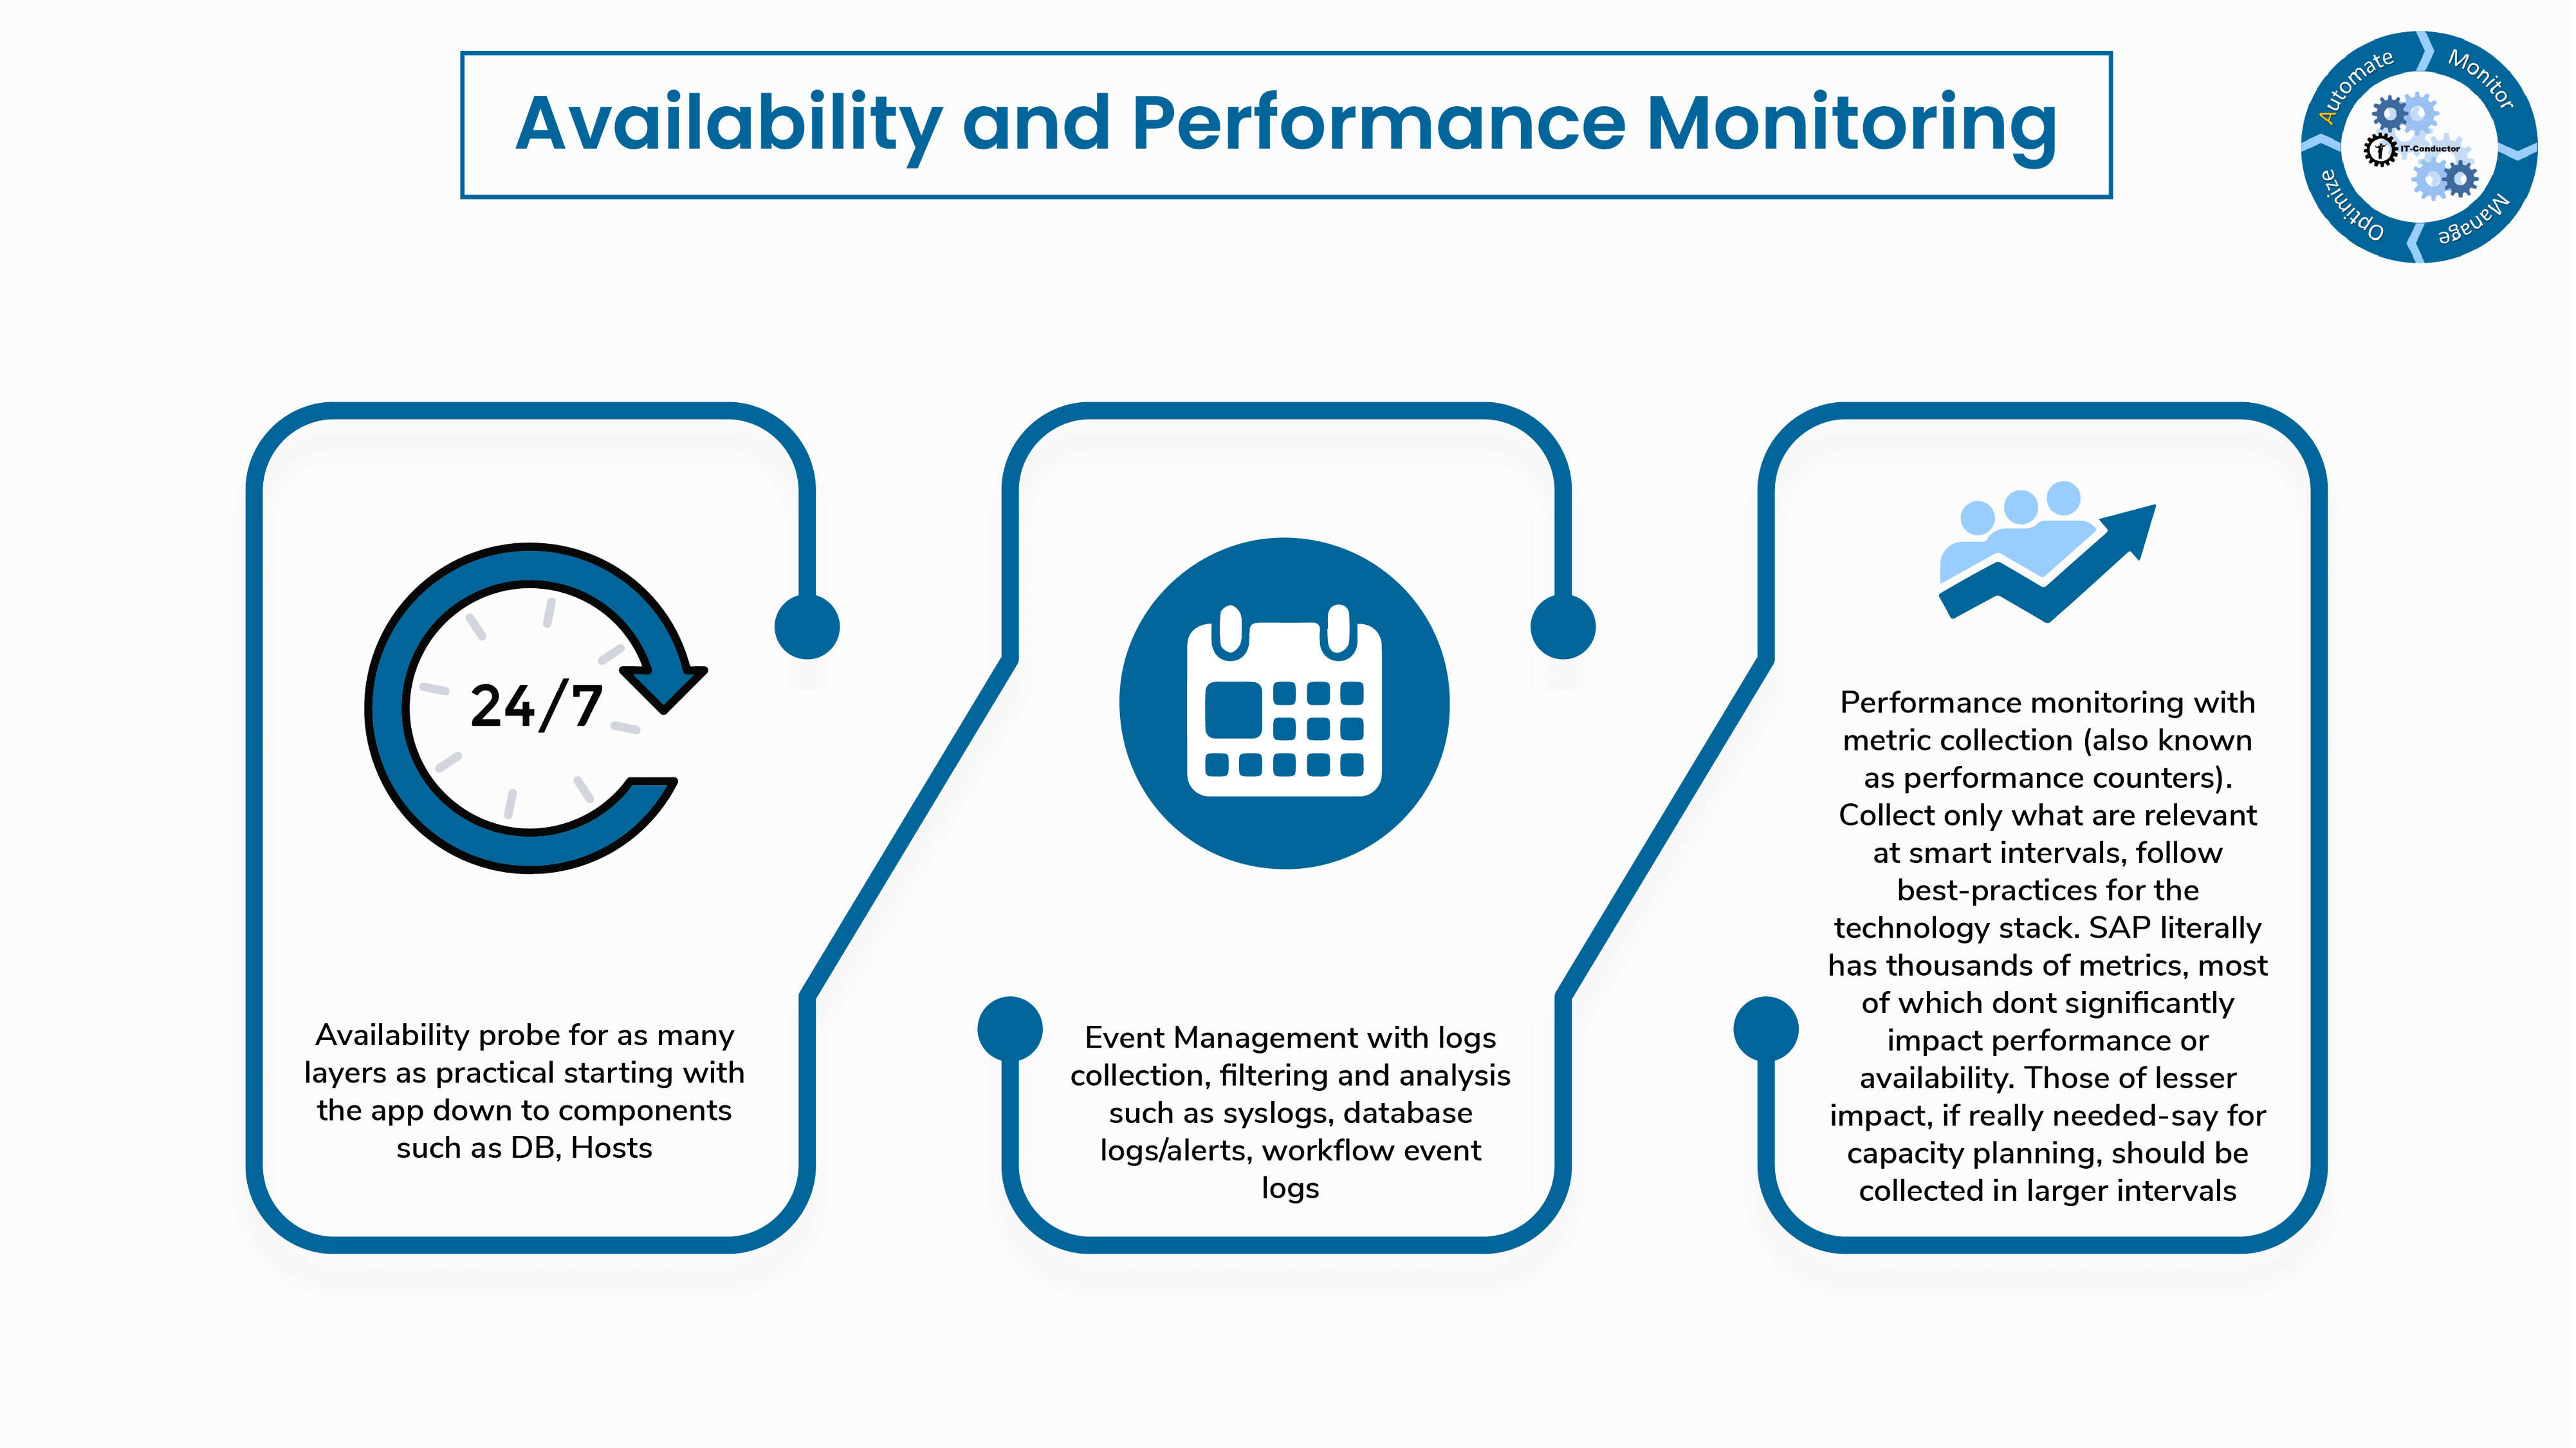 Availability and Performance Monitoring